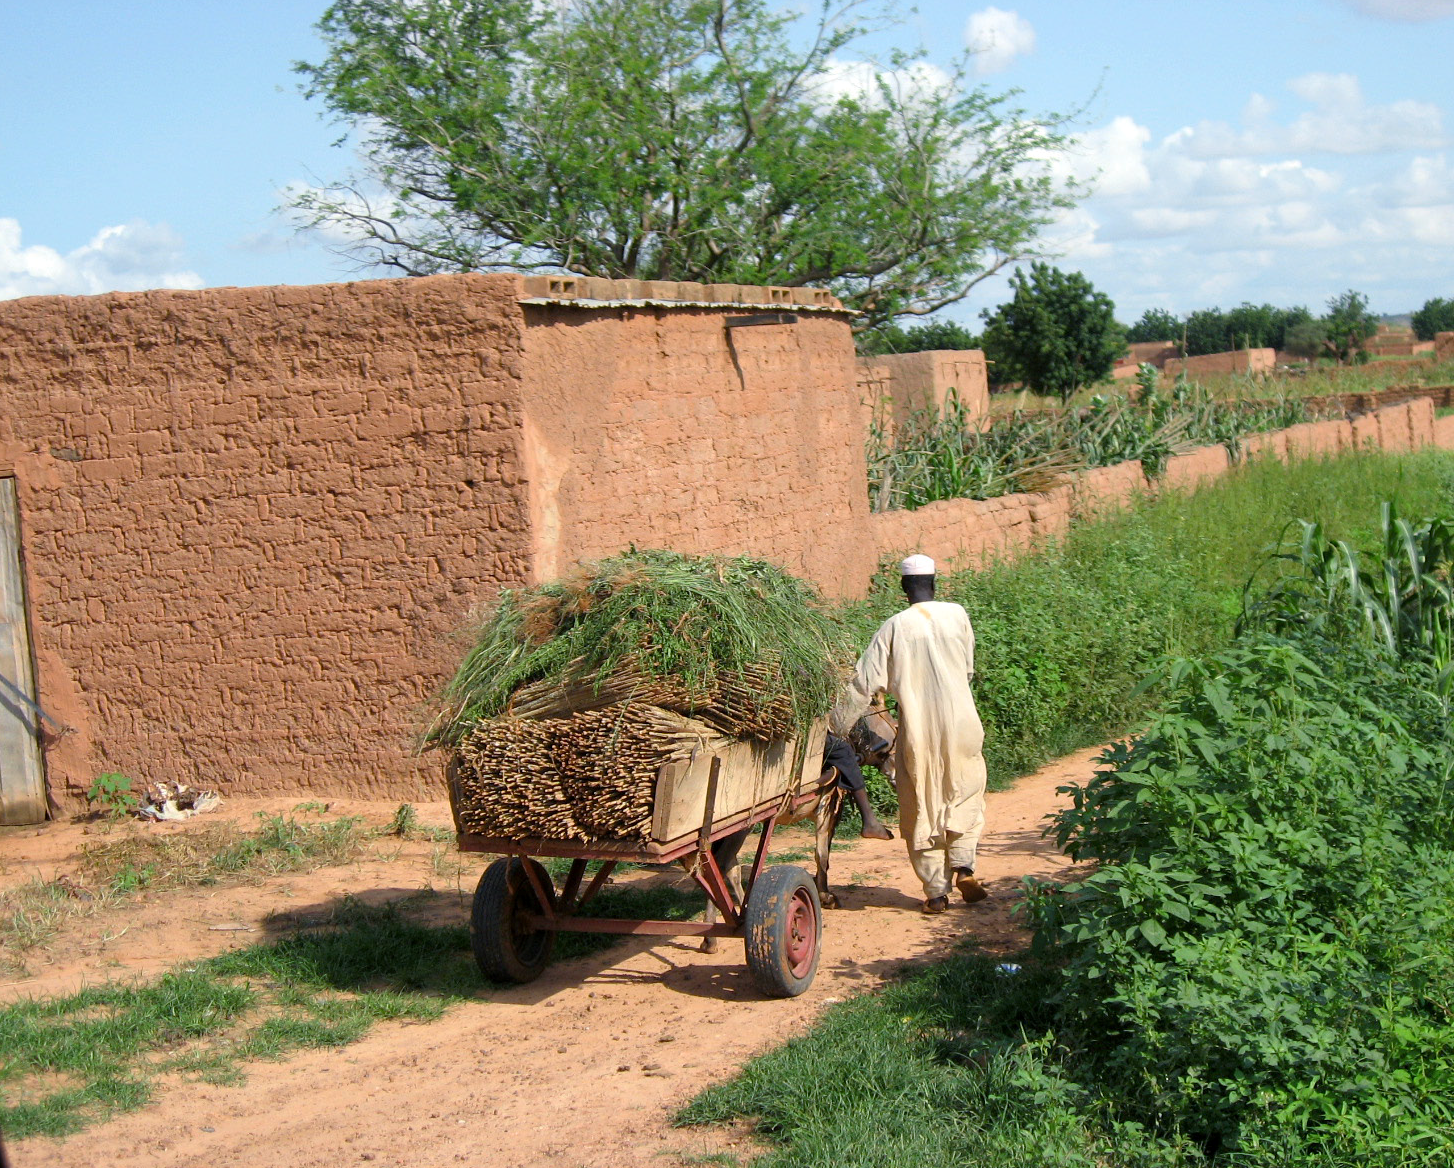 Community Based Disaster Risk Reduction in Niger